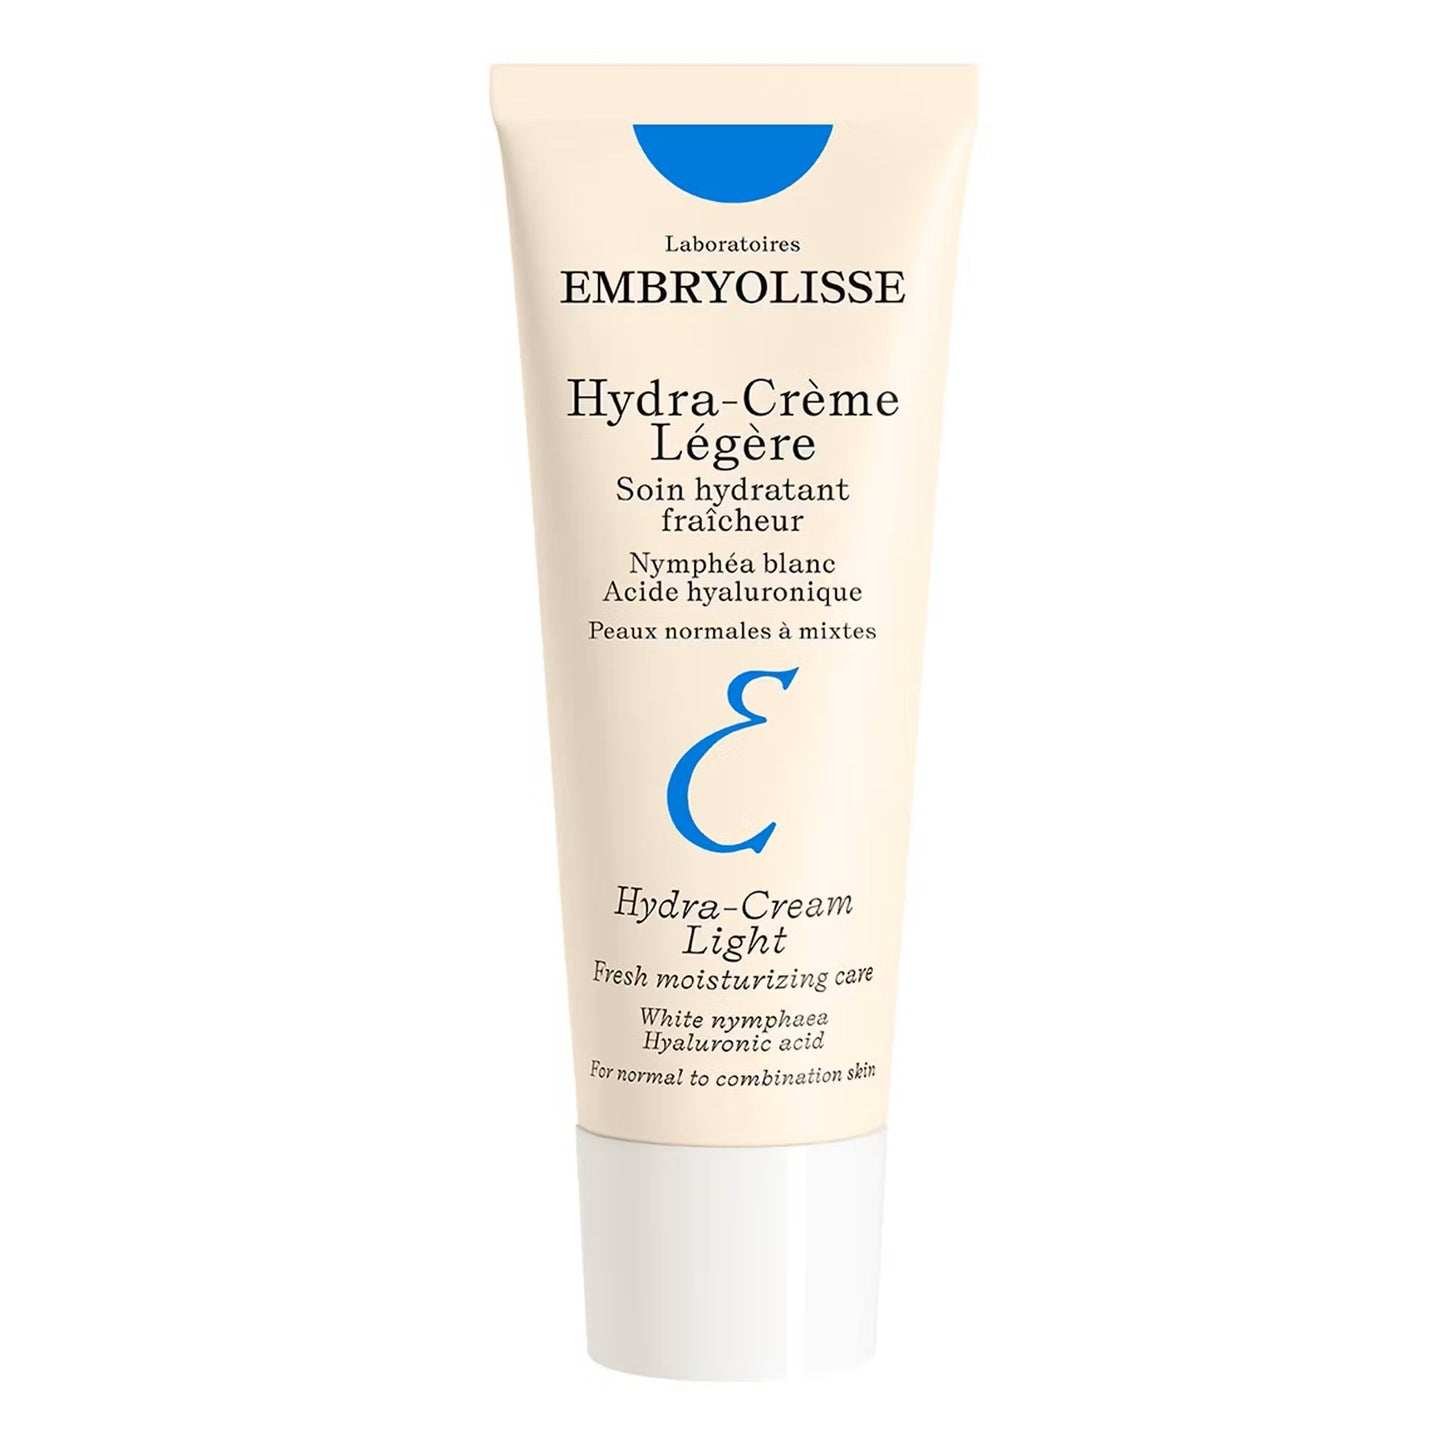 Embryolisse Hydra-Cream Light 40ml with White Nymphaea and Hyaluronic Acid